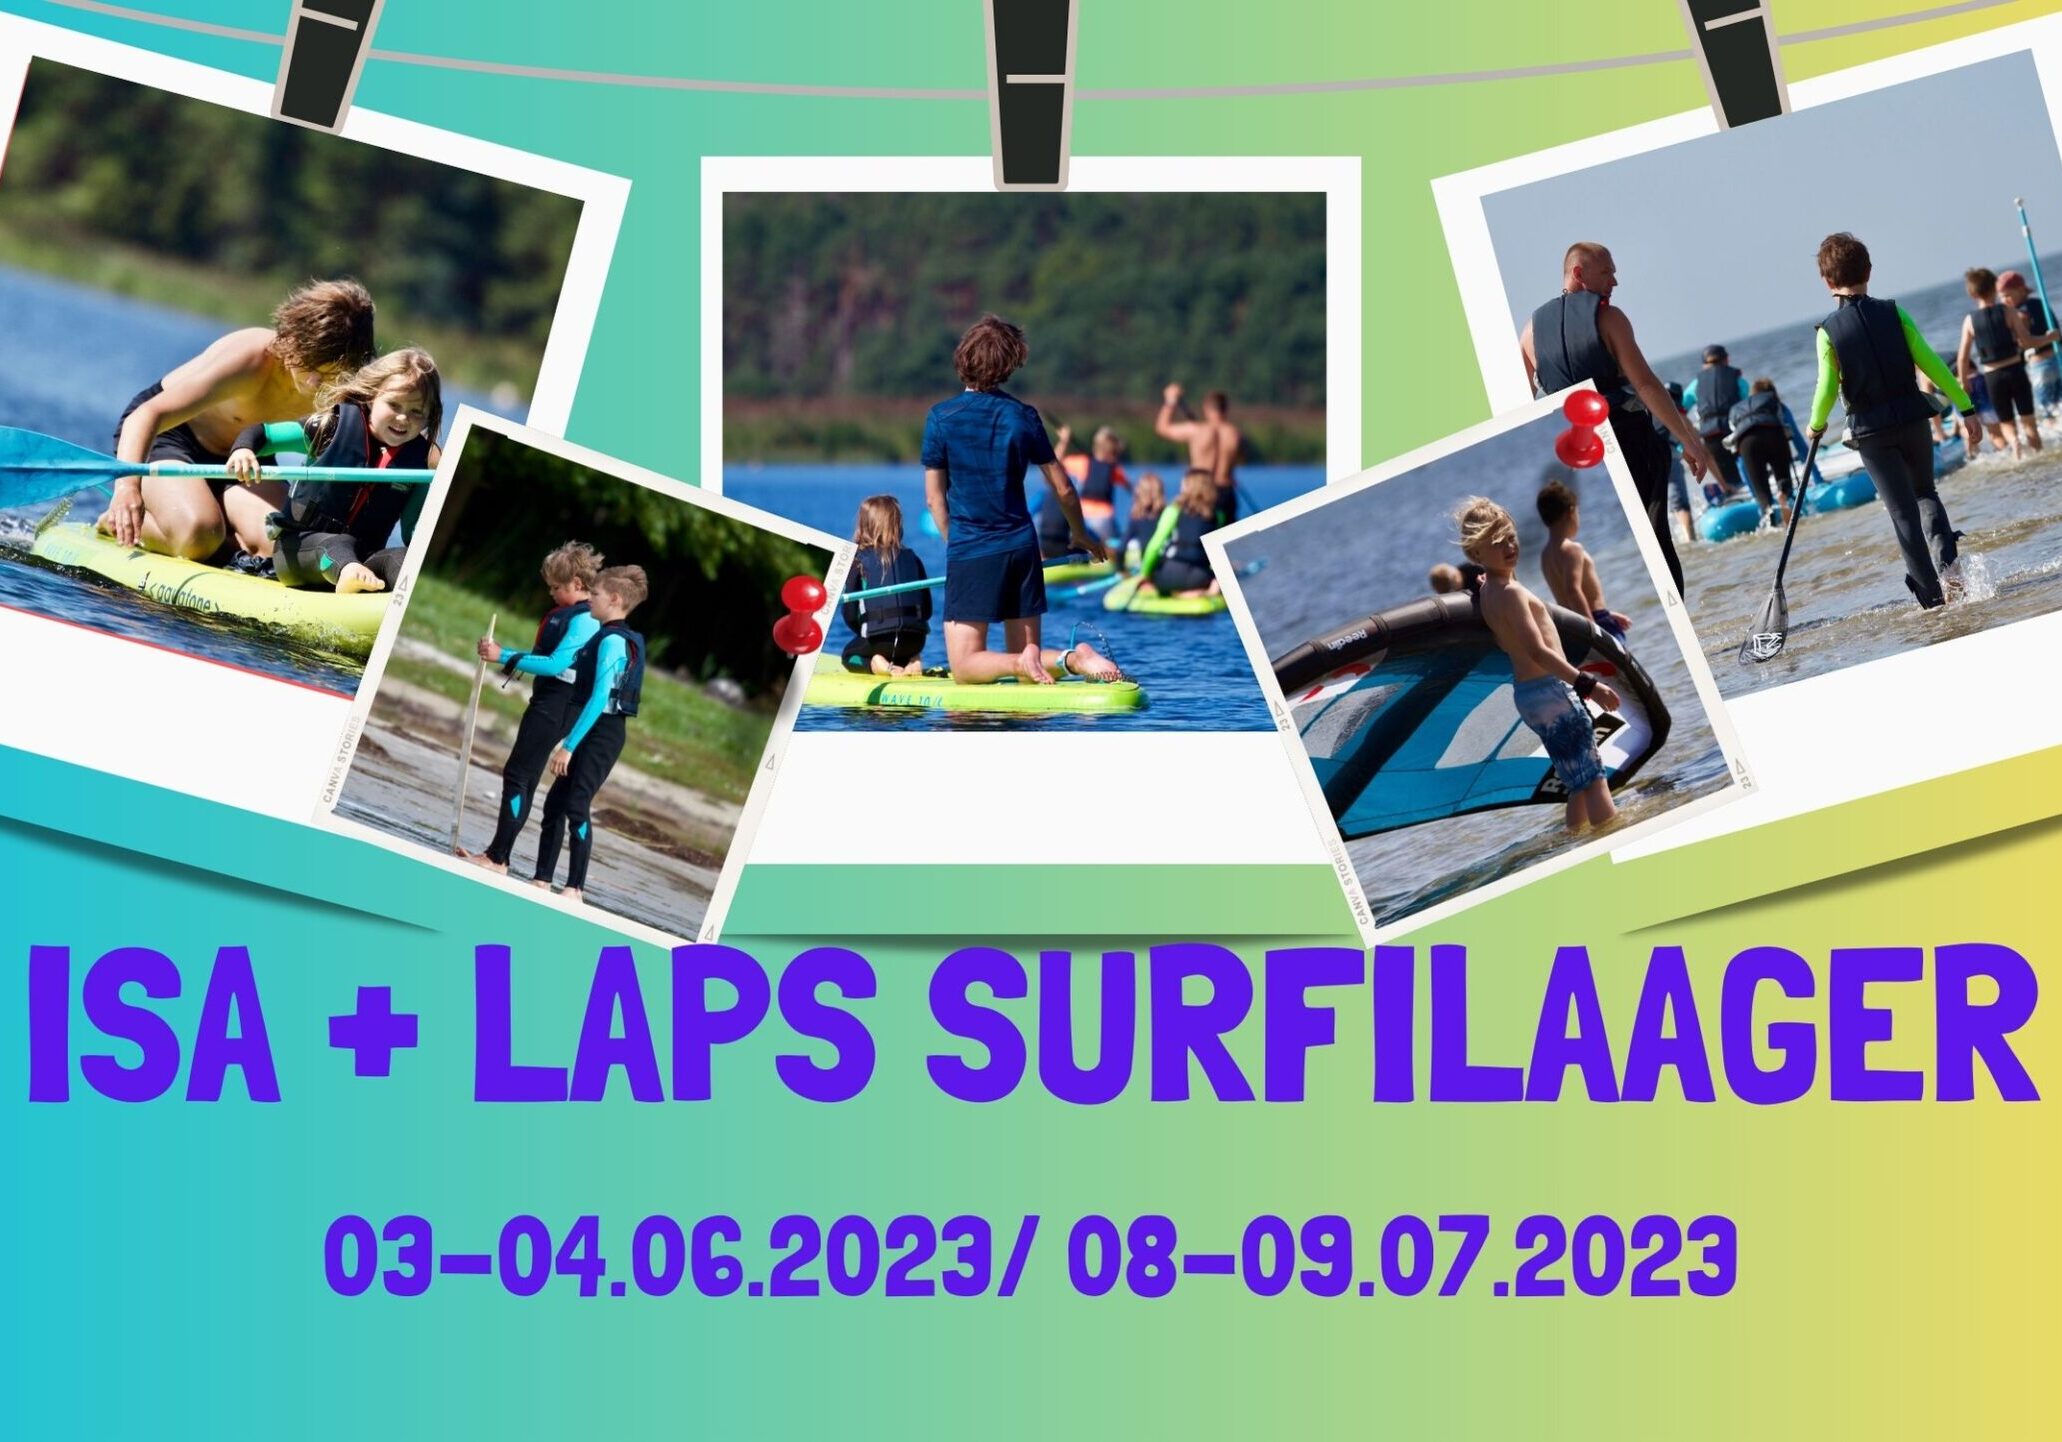 ISA + LAPS SURFILAAGER